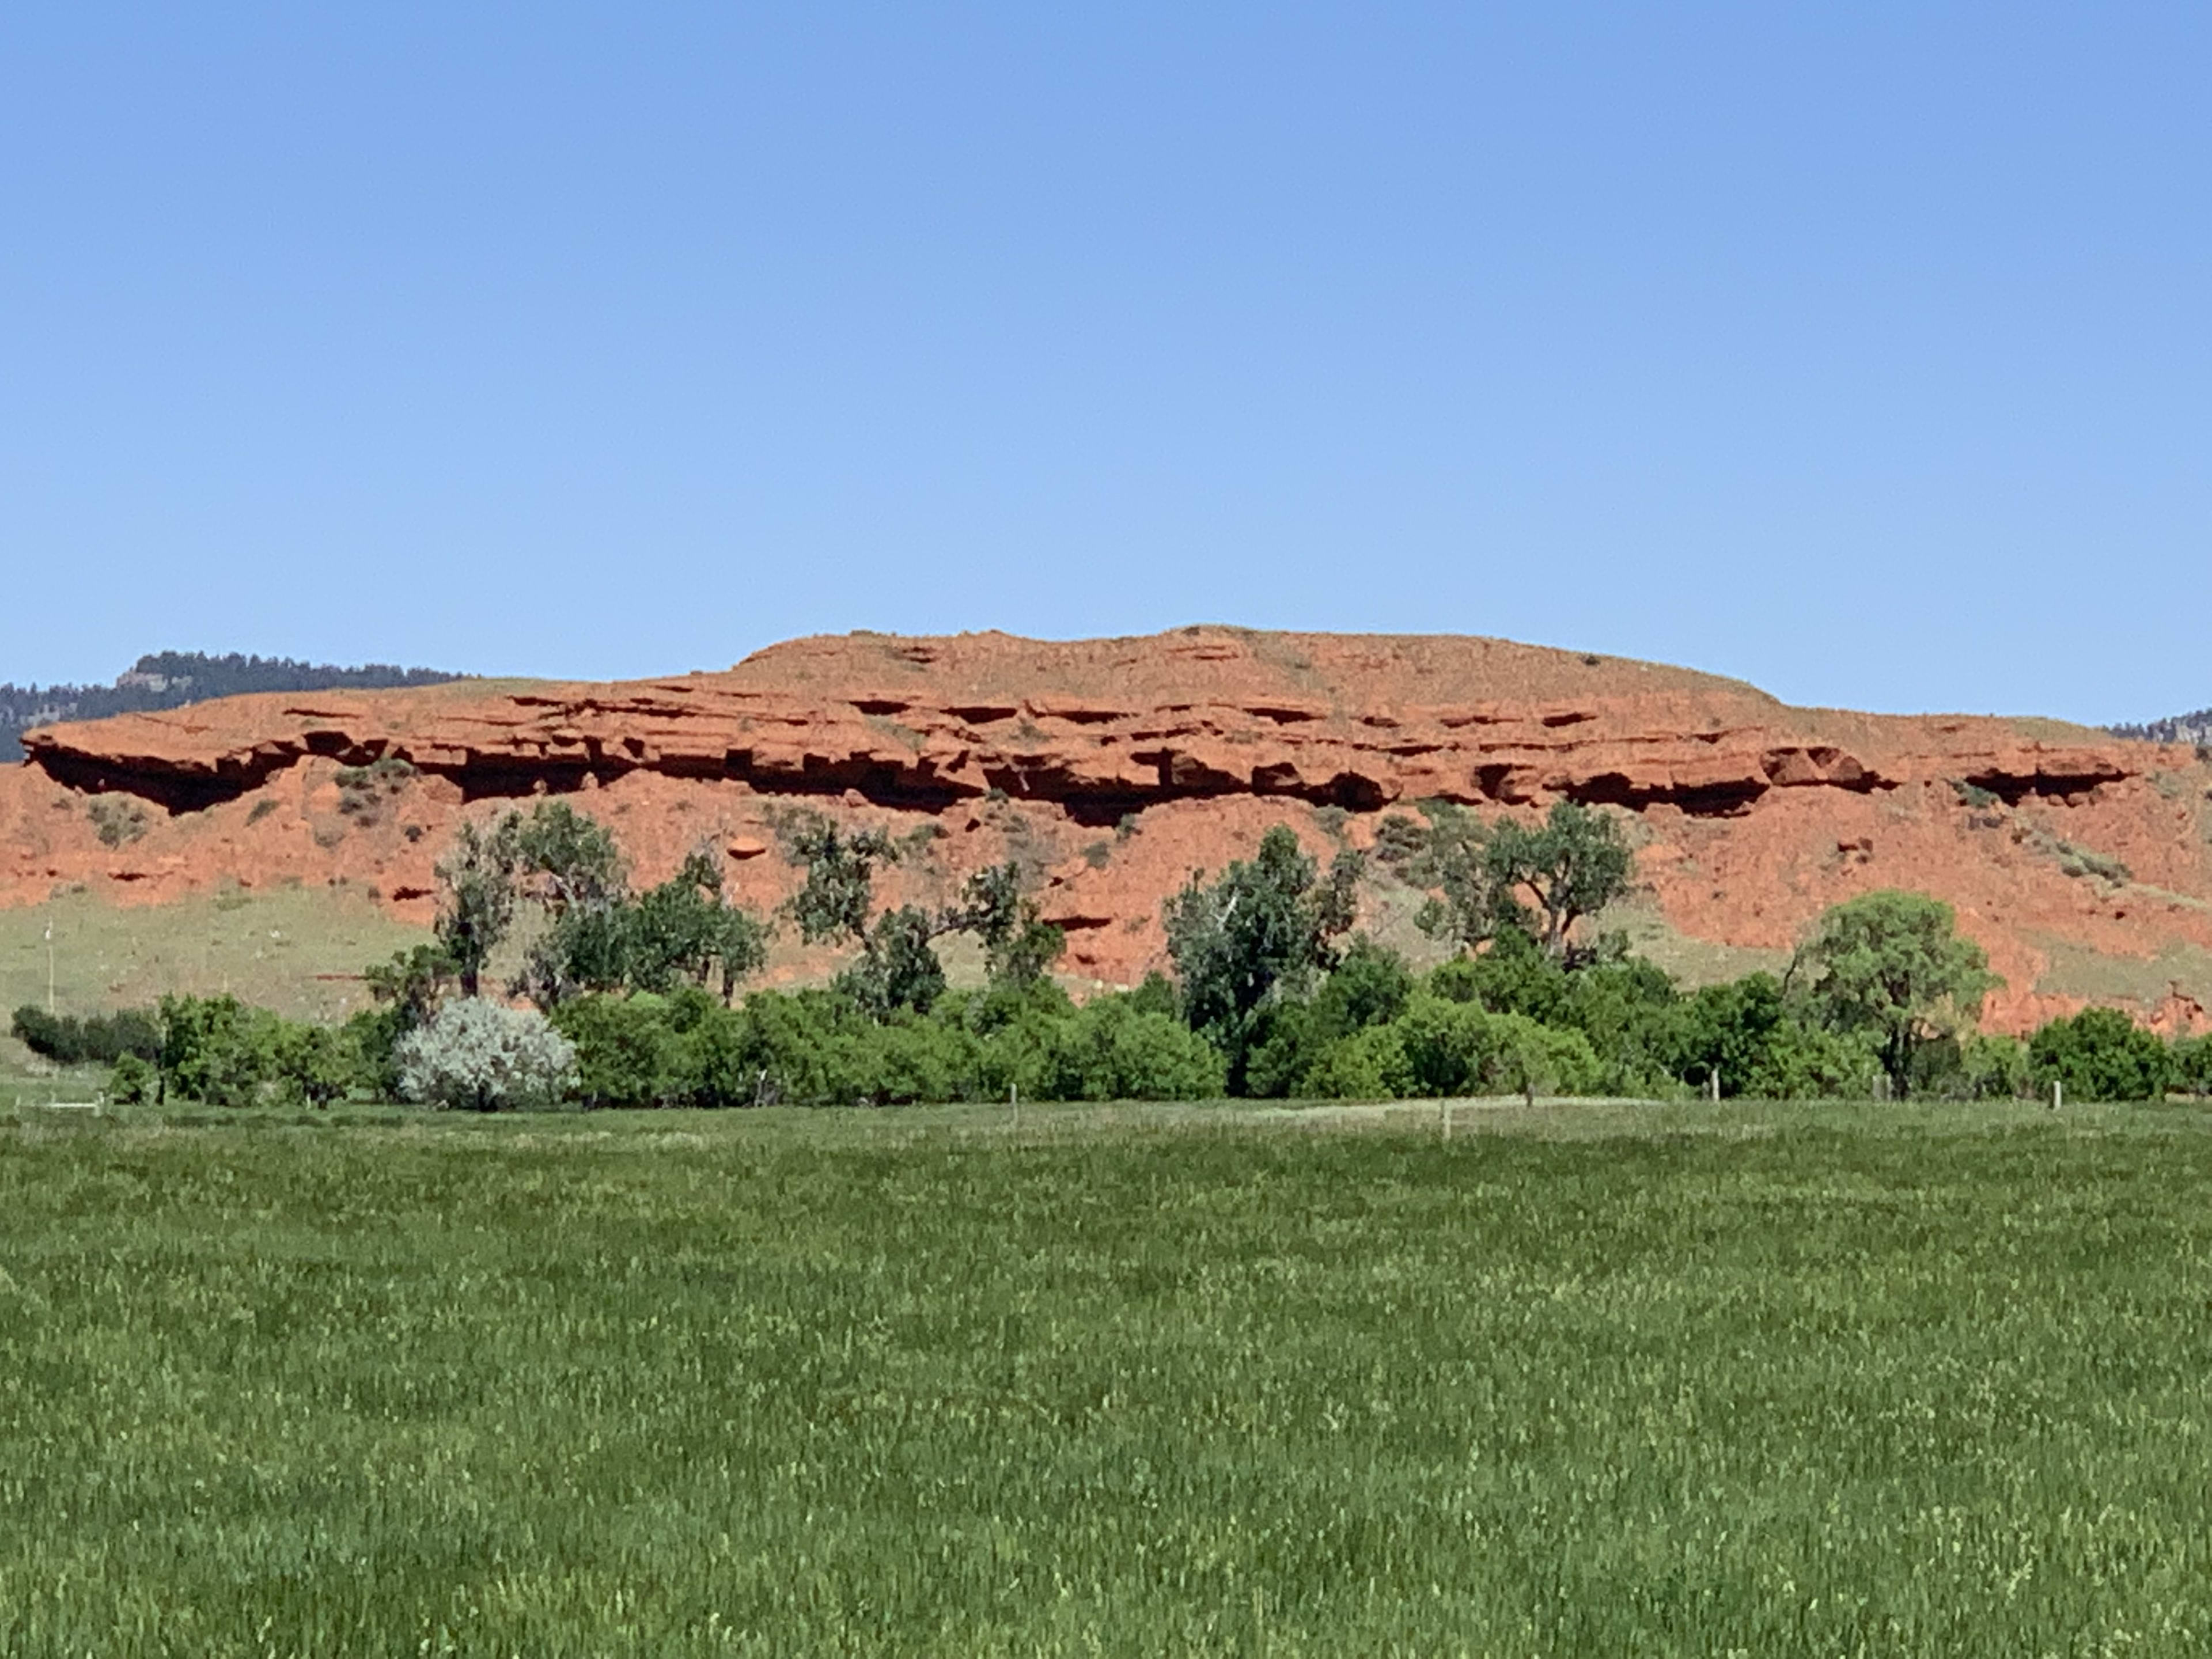 The famous red bluff near Beulah, Wyoming, that overlooks the campsites.